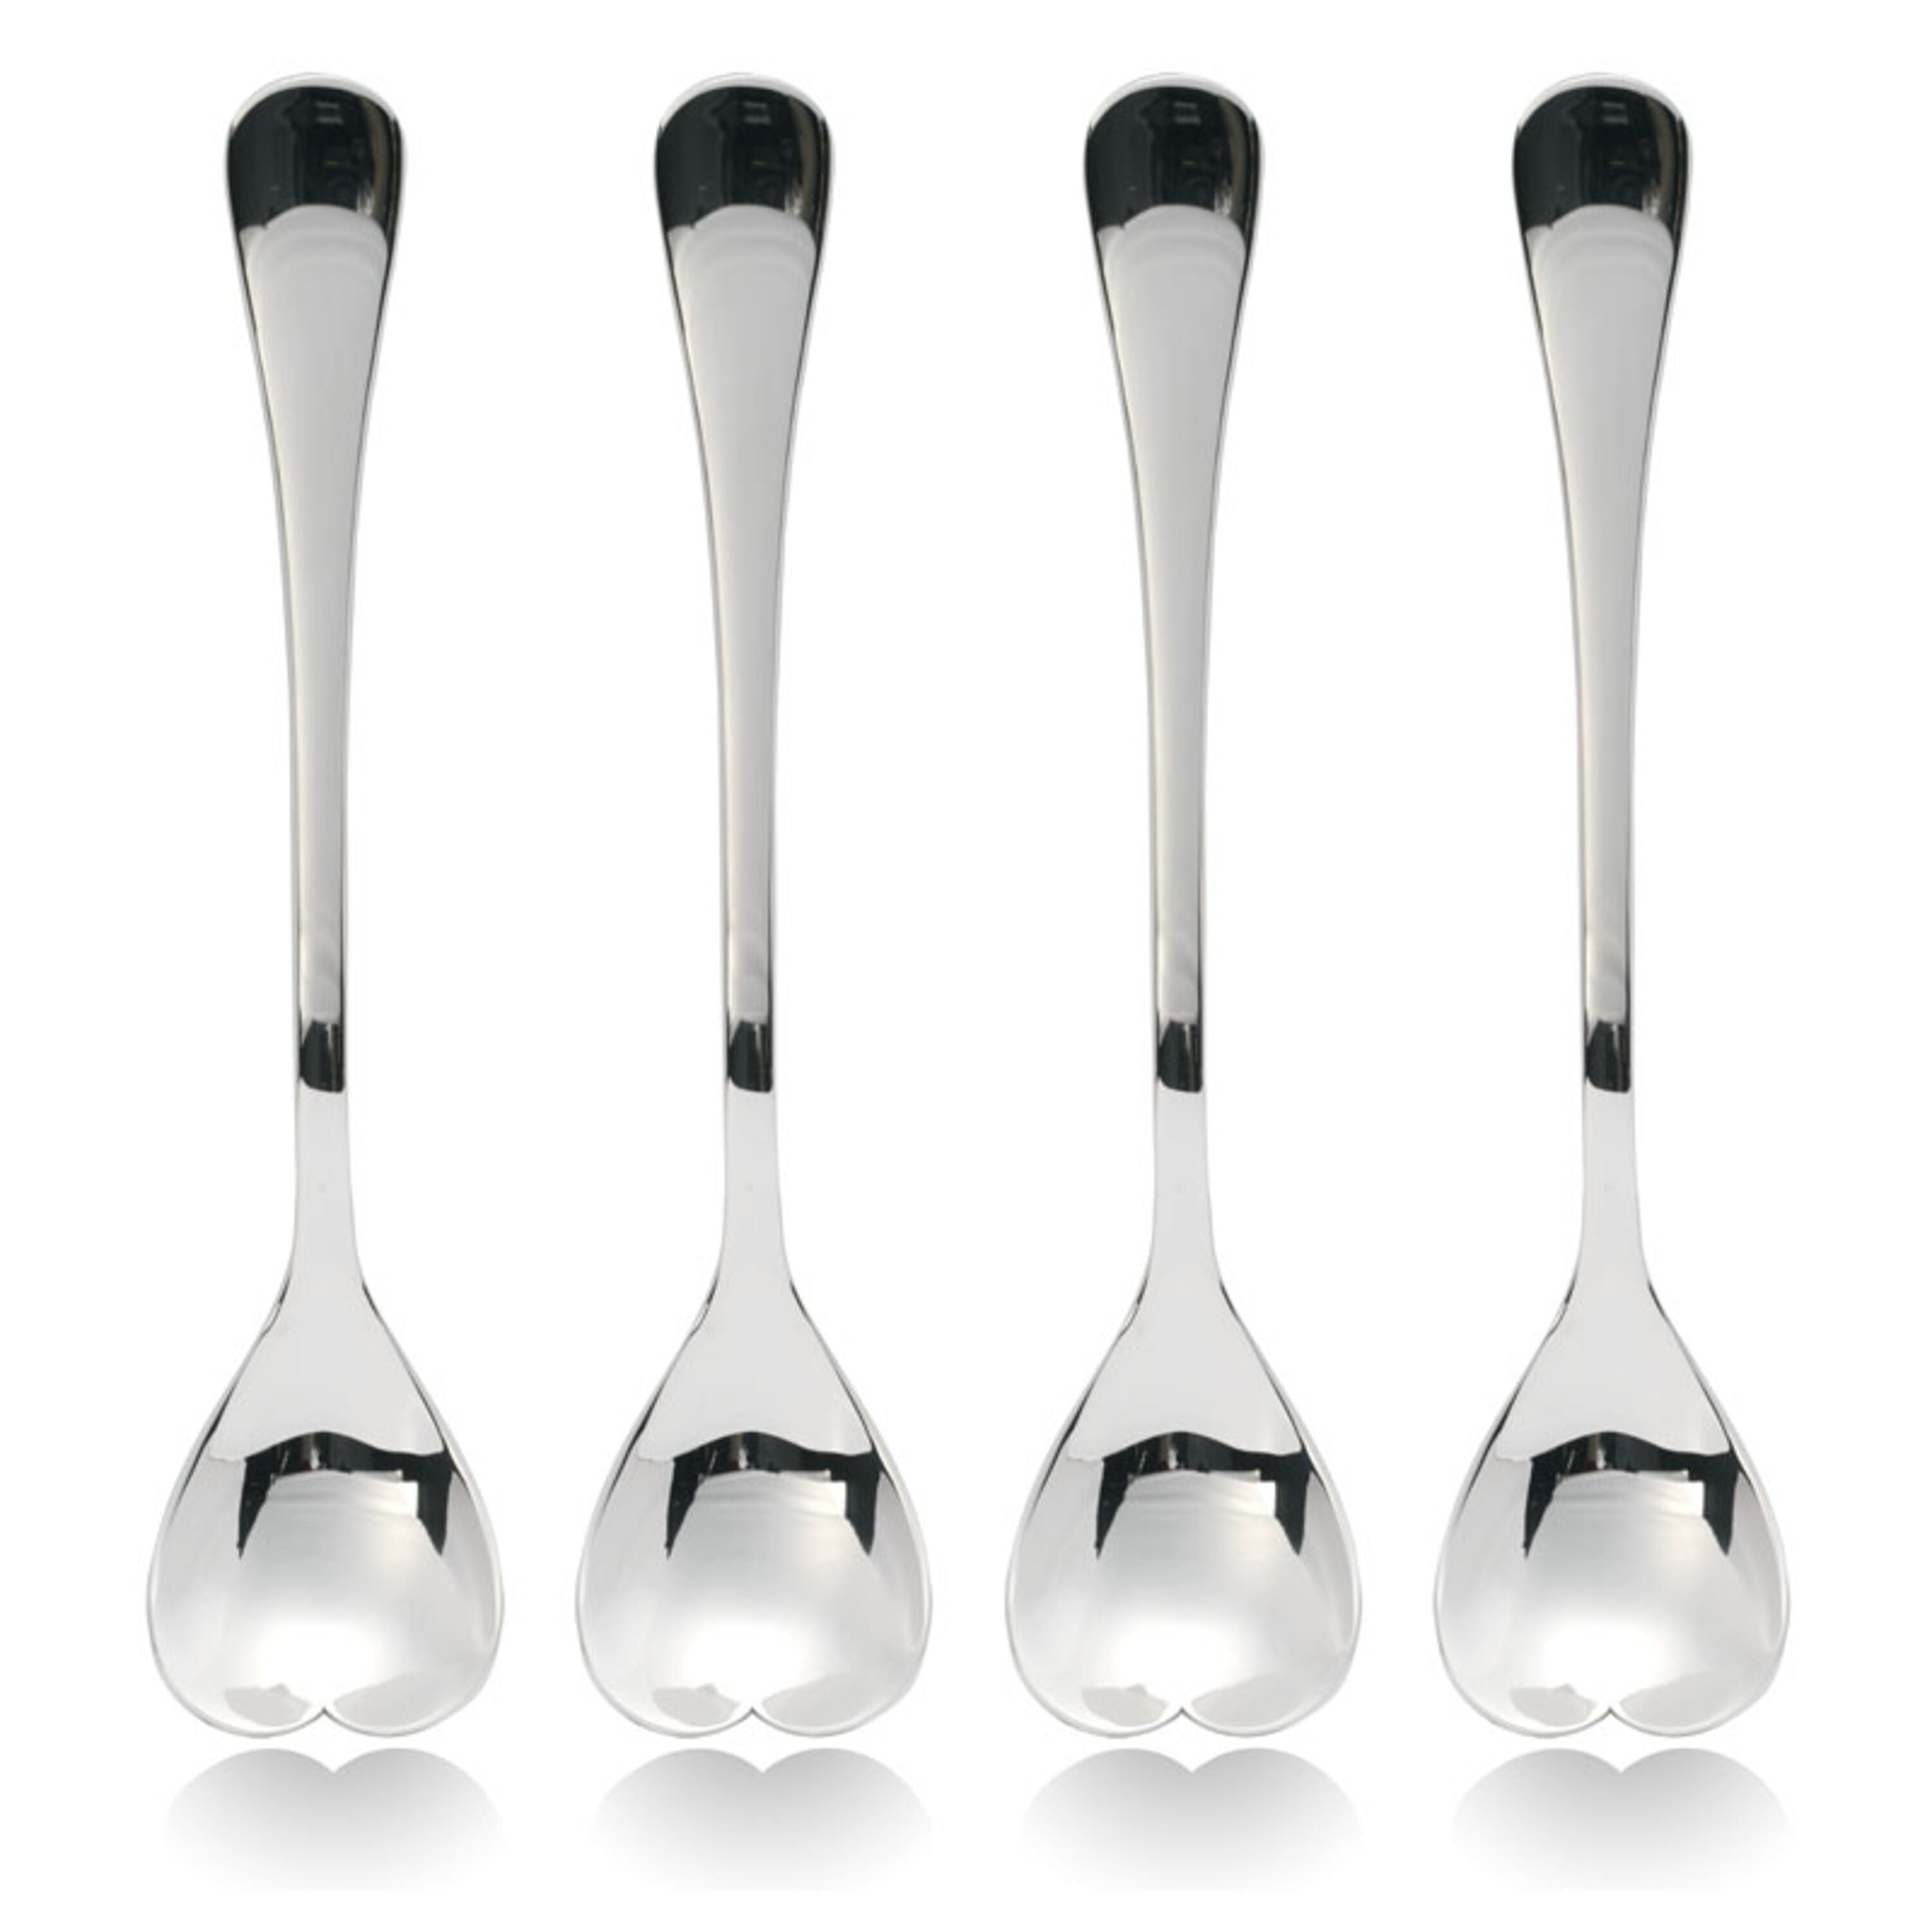 Towle T5271444 Irresistible 18.0 Stainless Steel Heart Shaped S4 Ice Cream Spoons